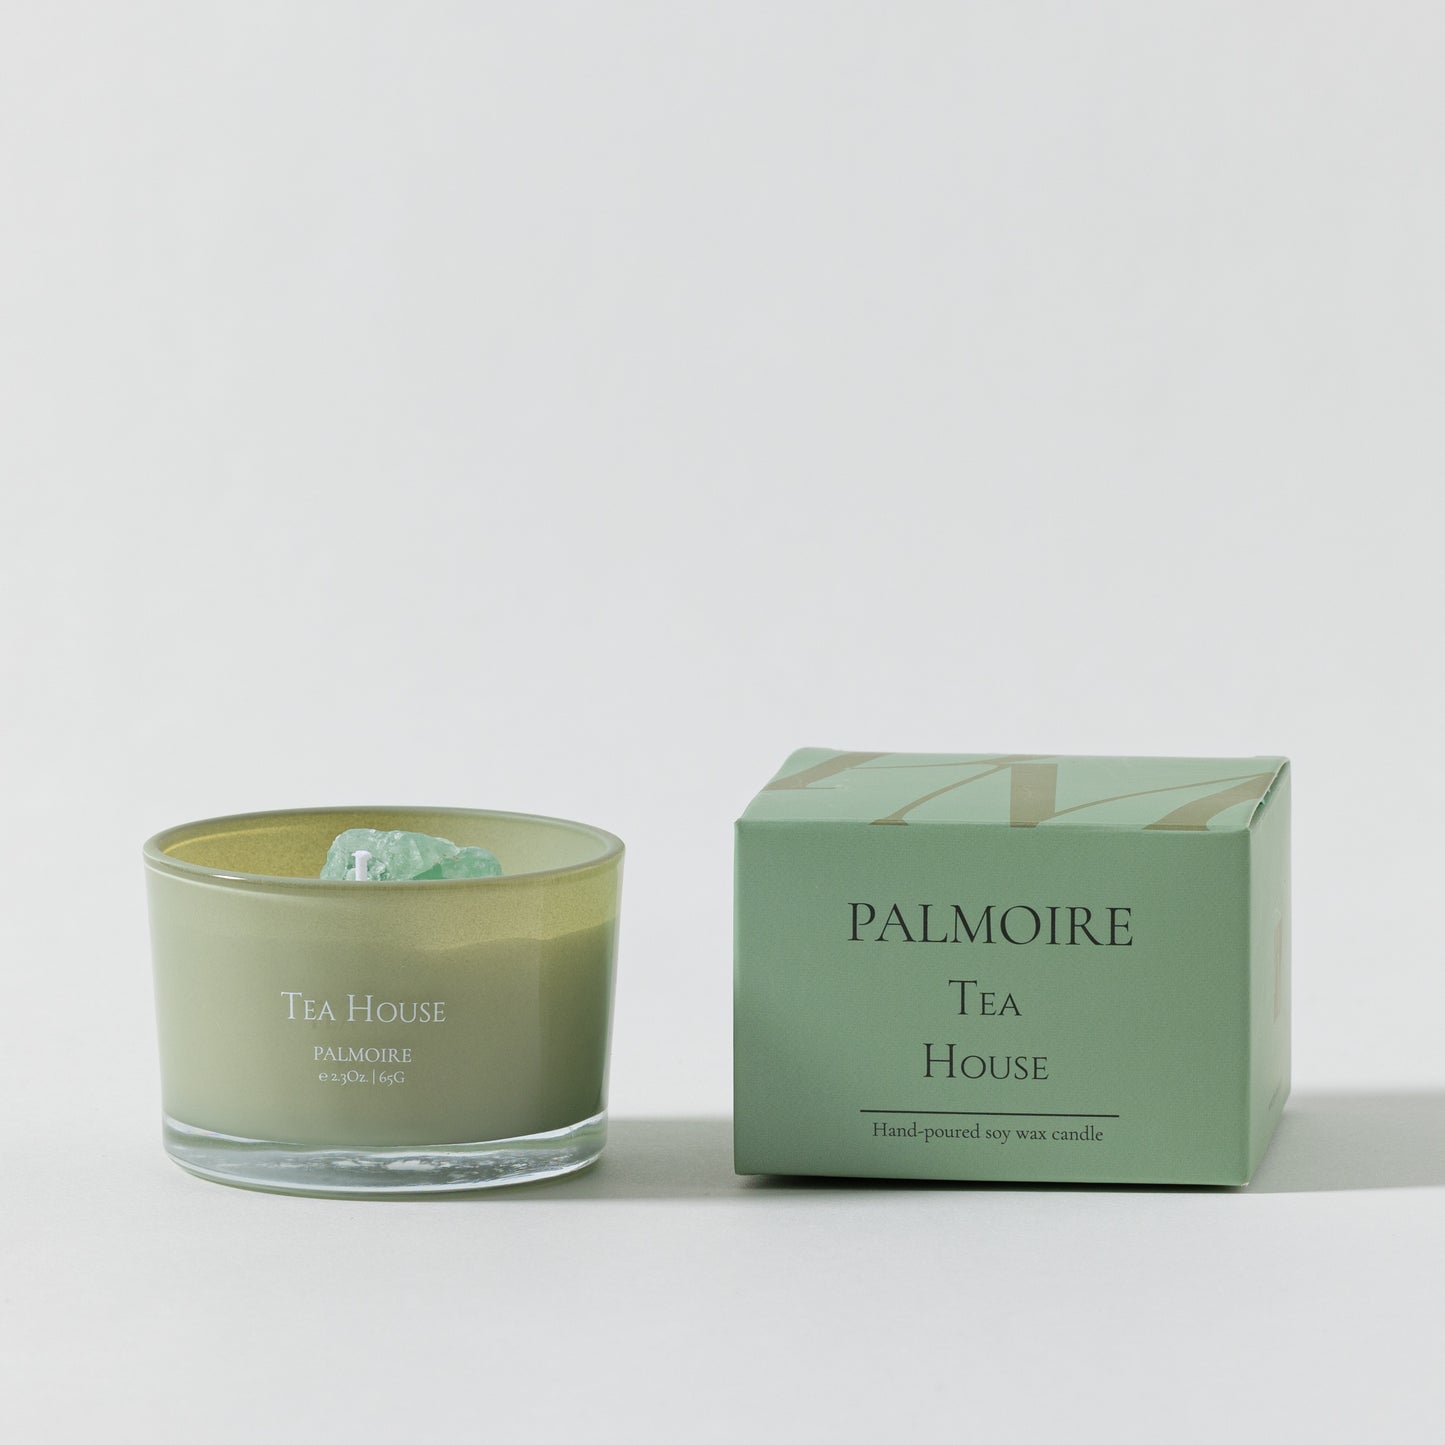 Tea House Soy Wax Candle - PALMOIRE